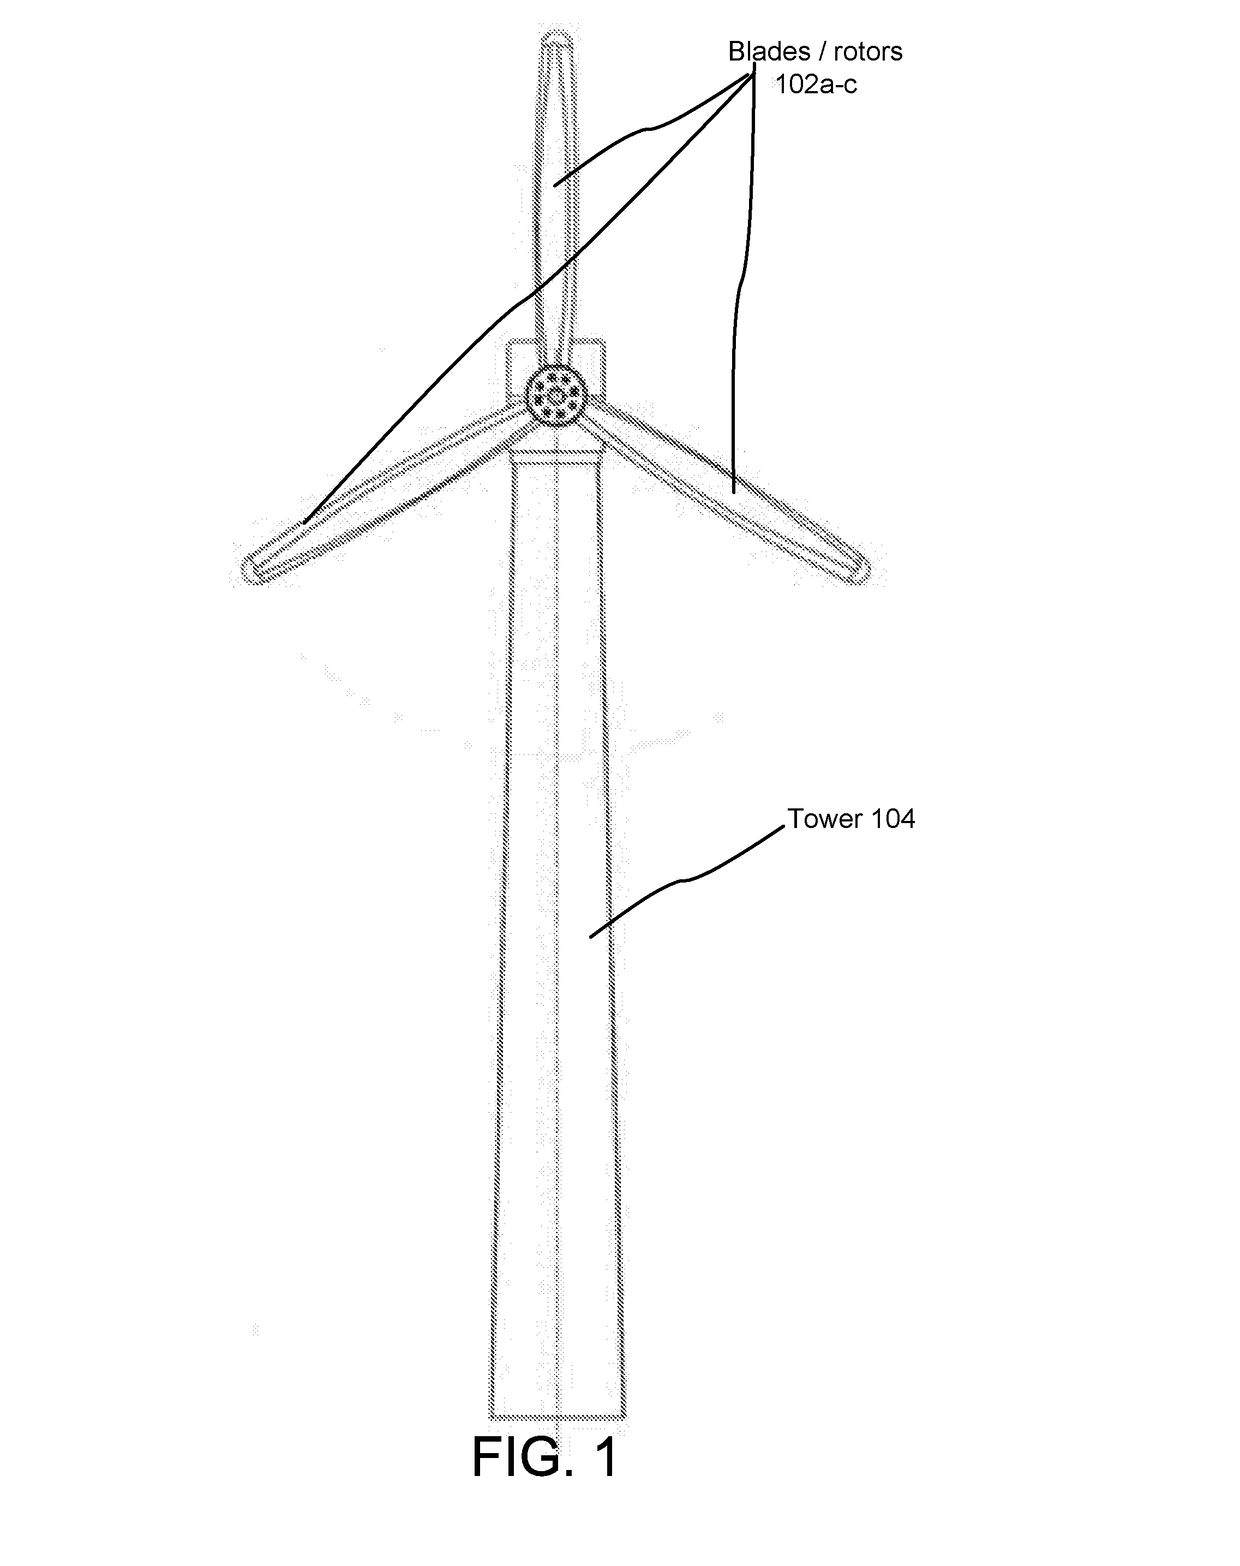 Hybrid wind turbine for power output in low and zero wind conditions